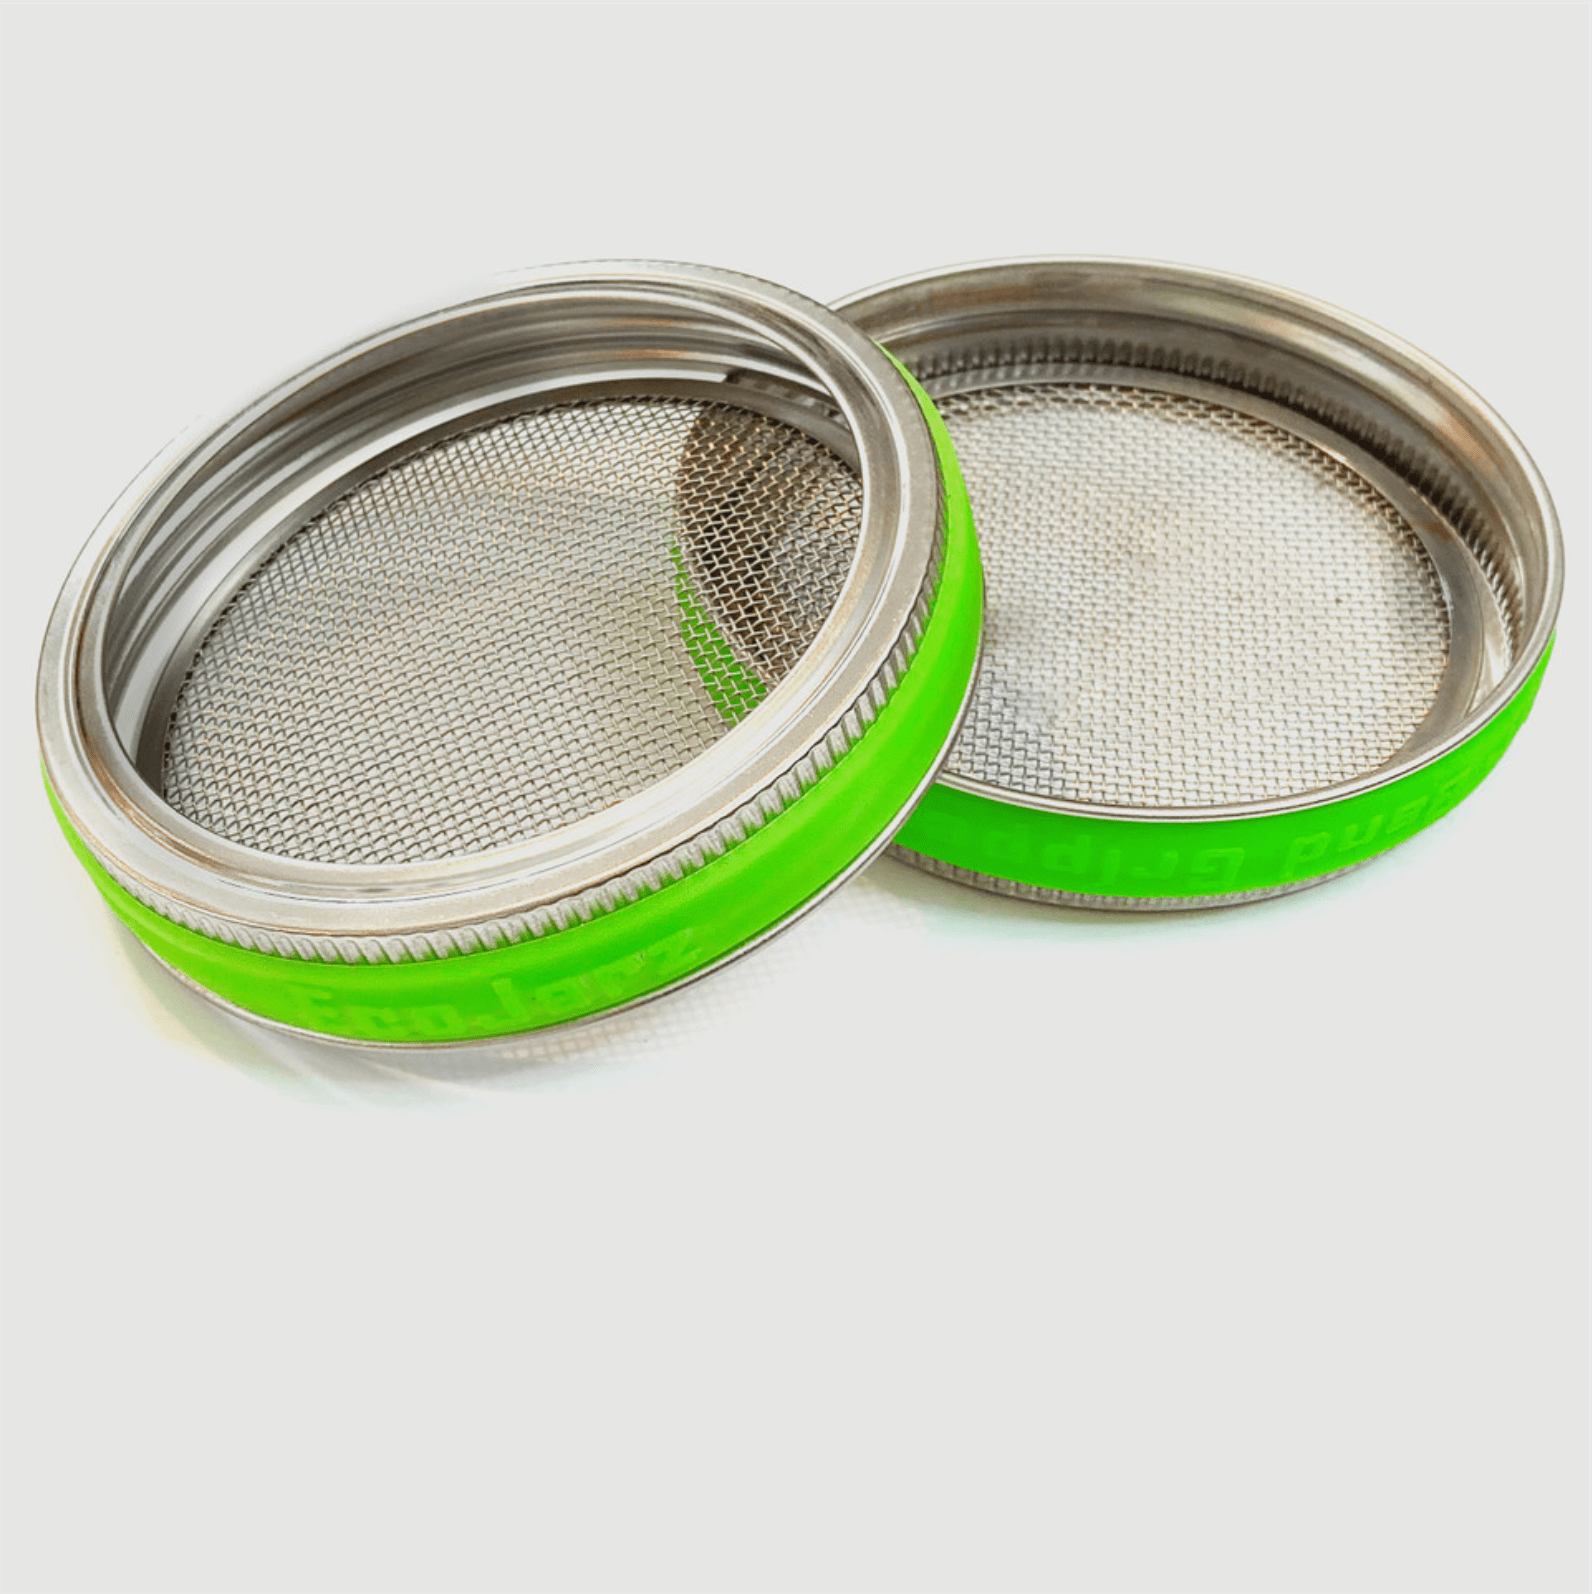 Photo of a stainless steel mesh lid